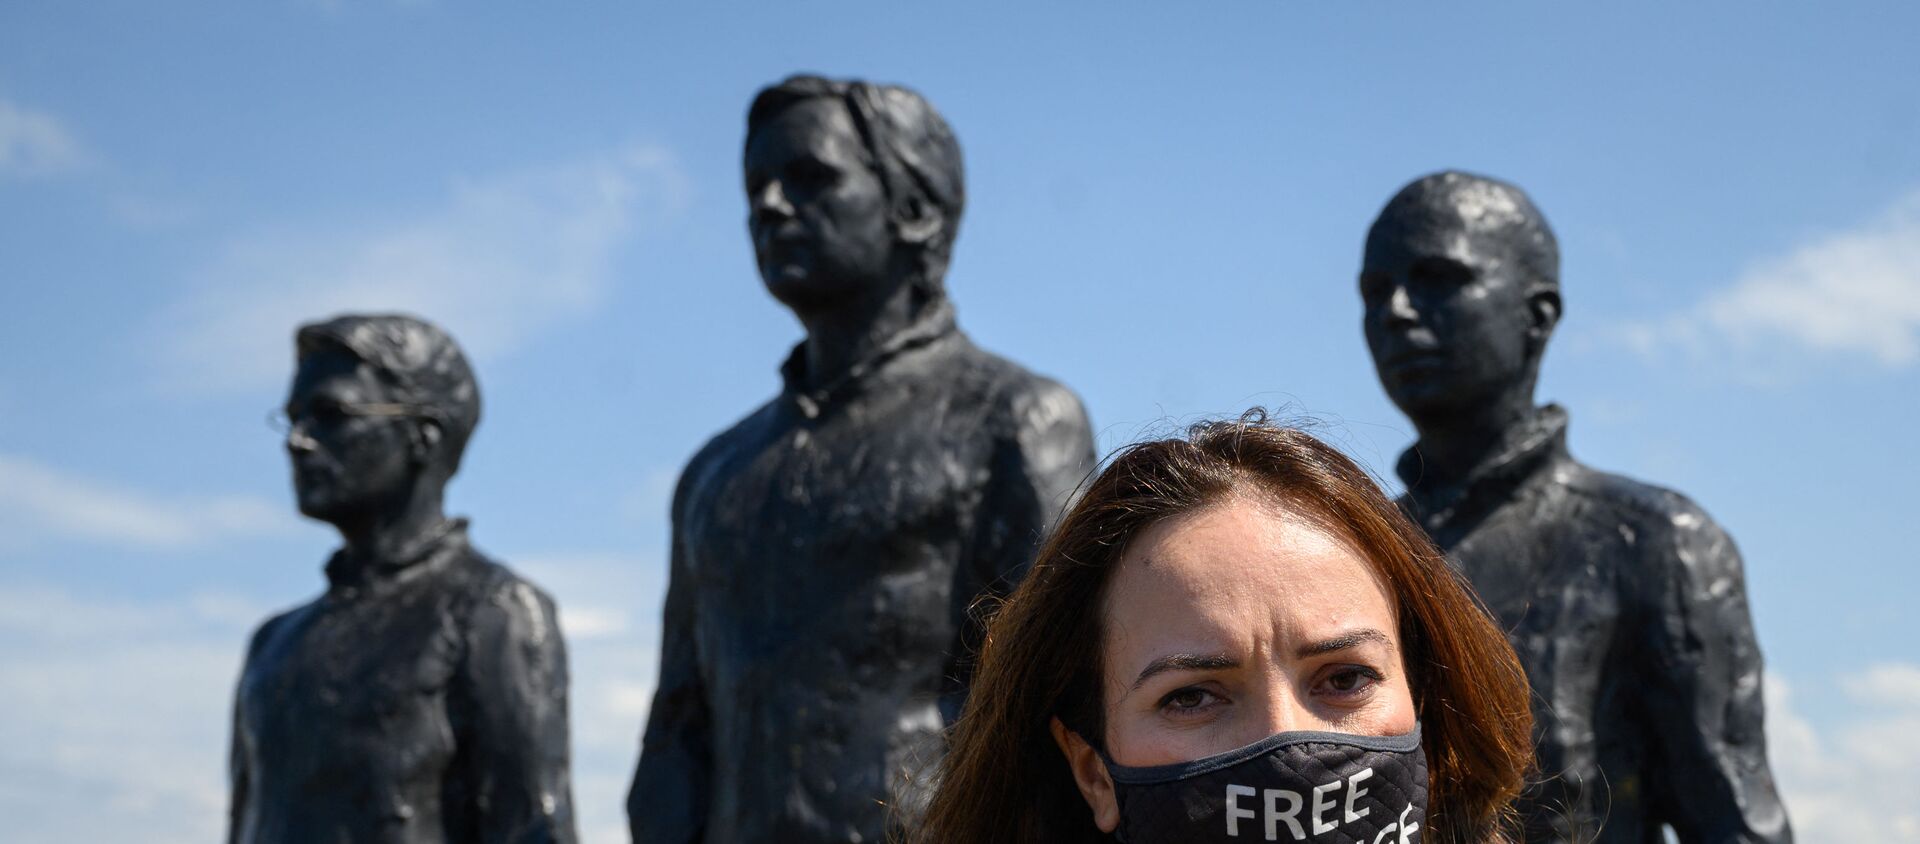 English lawyer and partner of Wikileaks founder Julian Assange, Stella Morris wearing a facemask reading: Free Assange poses next to statues representing  Edward Snowden, Julian Assange and Chelsea Manning during the Geneva Appeal for the immediate release of Wikileaks founder Julian Assange in Geneva, on June 4, 2021. - The Geneva Appeal was launched at a virtual event attended by the partner of the founder of WiikiLeaks, and the mayor of Geneva as well as several personalities, including the United Nations Special Rapporteur on Torture.  - Sputnik International, 1920, 04.06.2021